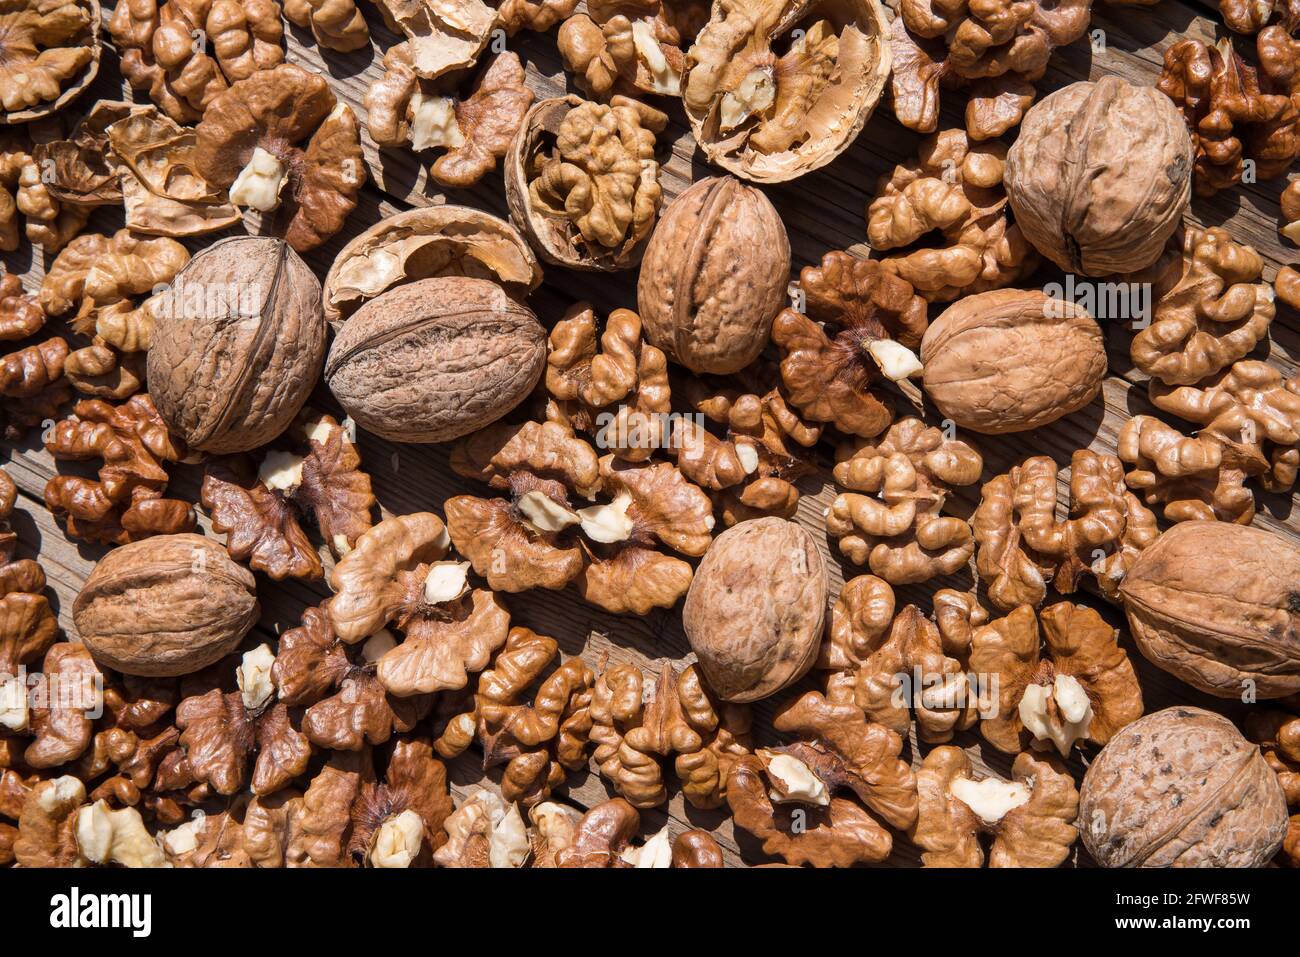 Walnuts whole and nuts Stock Photo